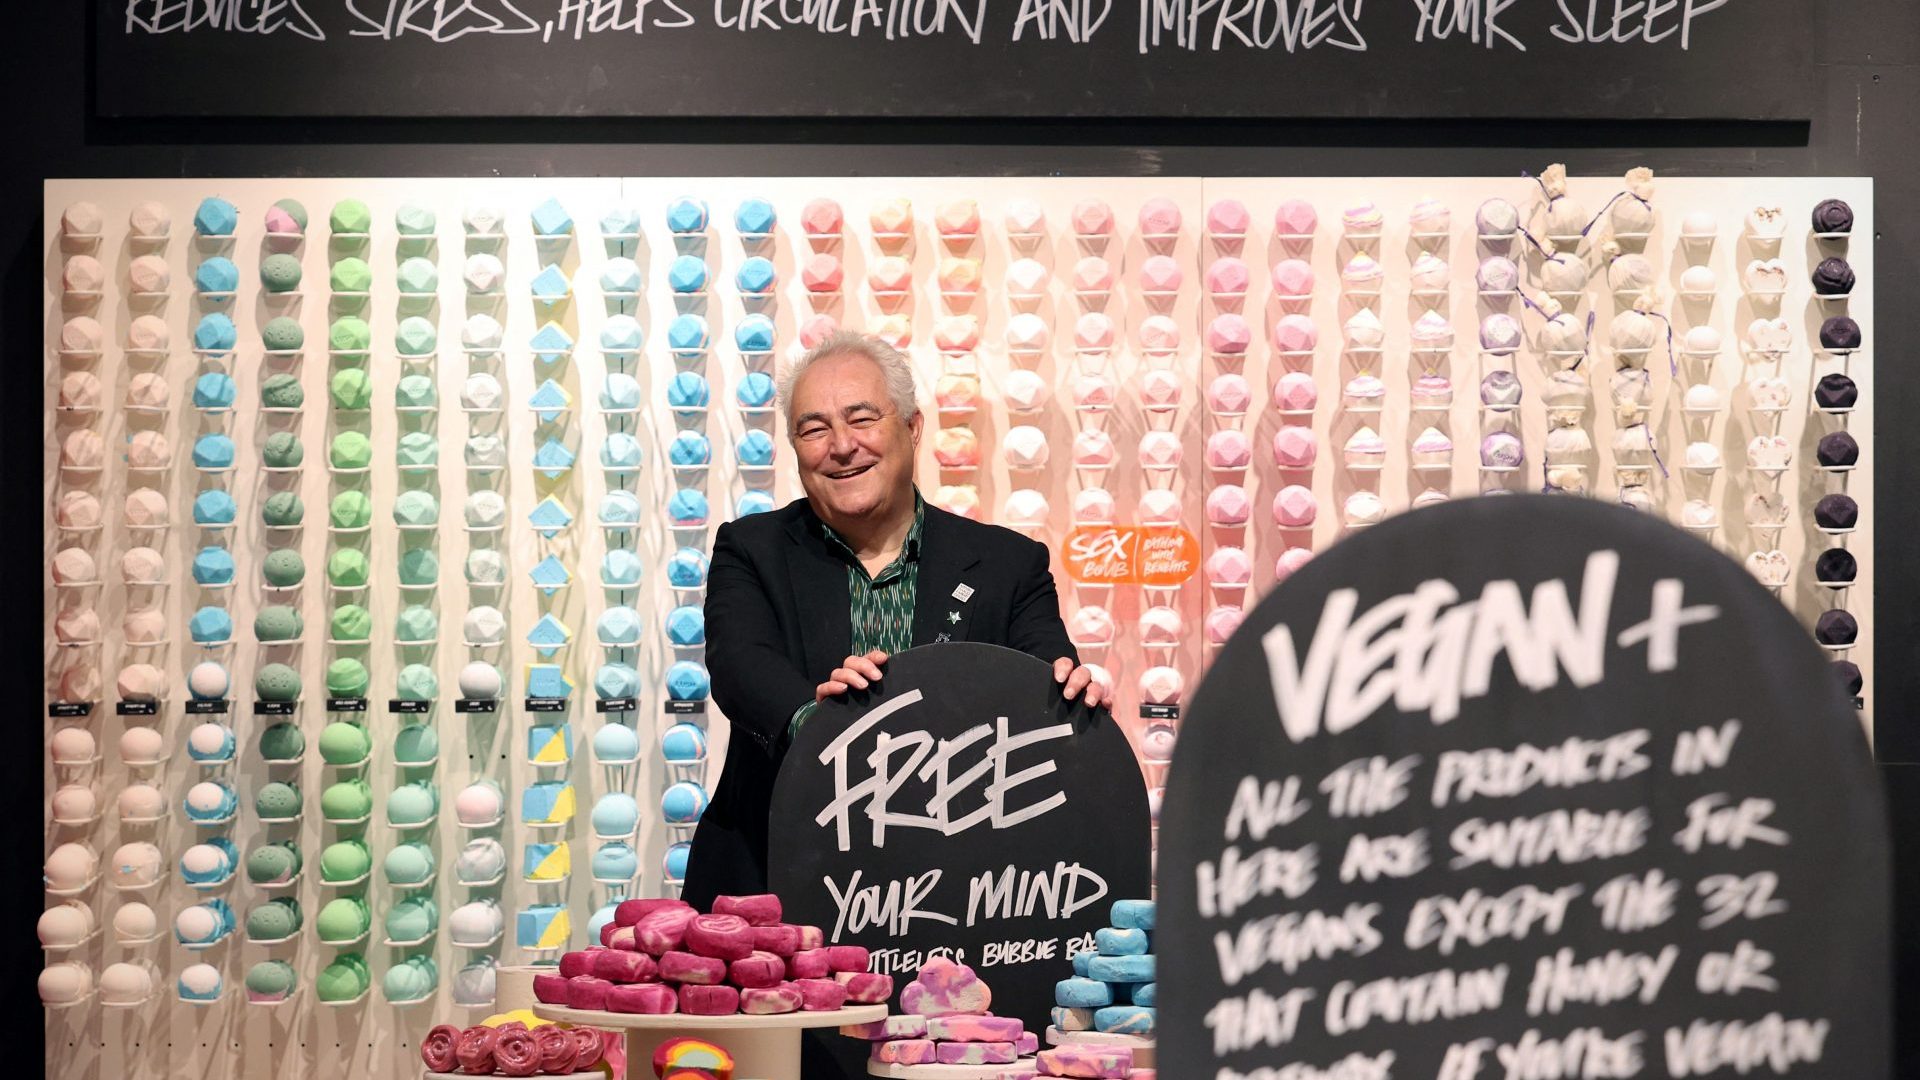 Mark Constantine, co-founder and co-CEO of Lush, poses for a photograph inside a "mock up" of a store at the cosmetic company's headquarters in Poole. Photo: ADRIAN DENNIS/AFP via Getty Images